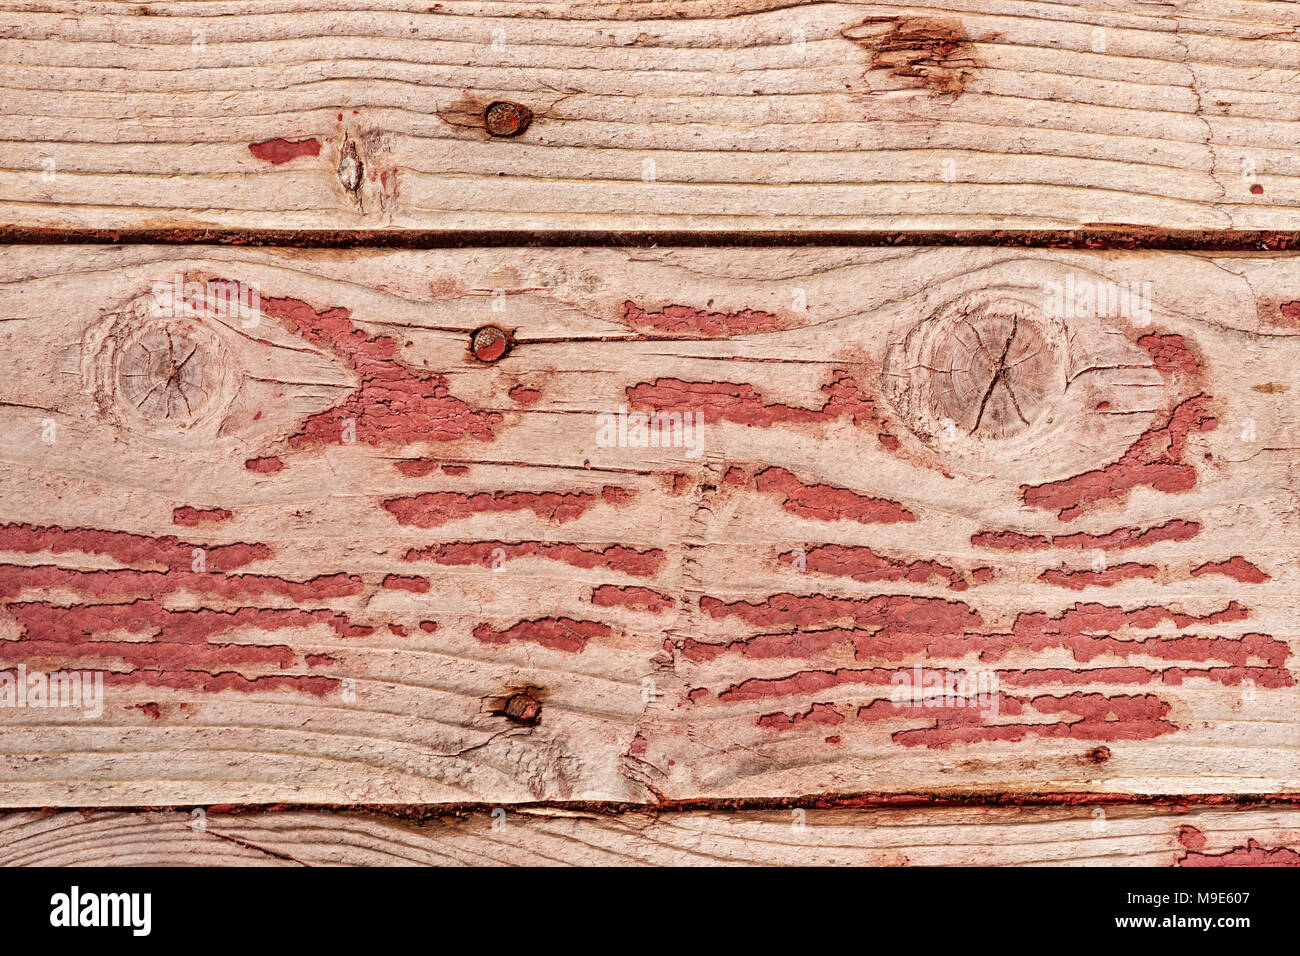 Grunge, weathered horizontal wooden planks with a traces of old red or purple paint, knots or snags visible Stock Photo